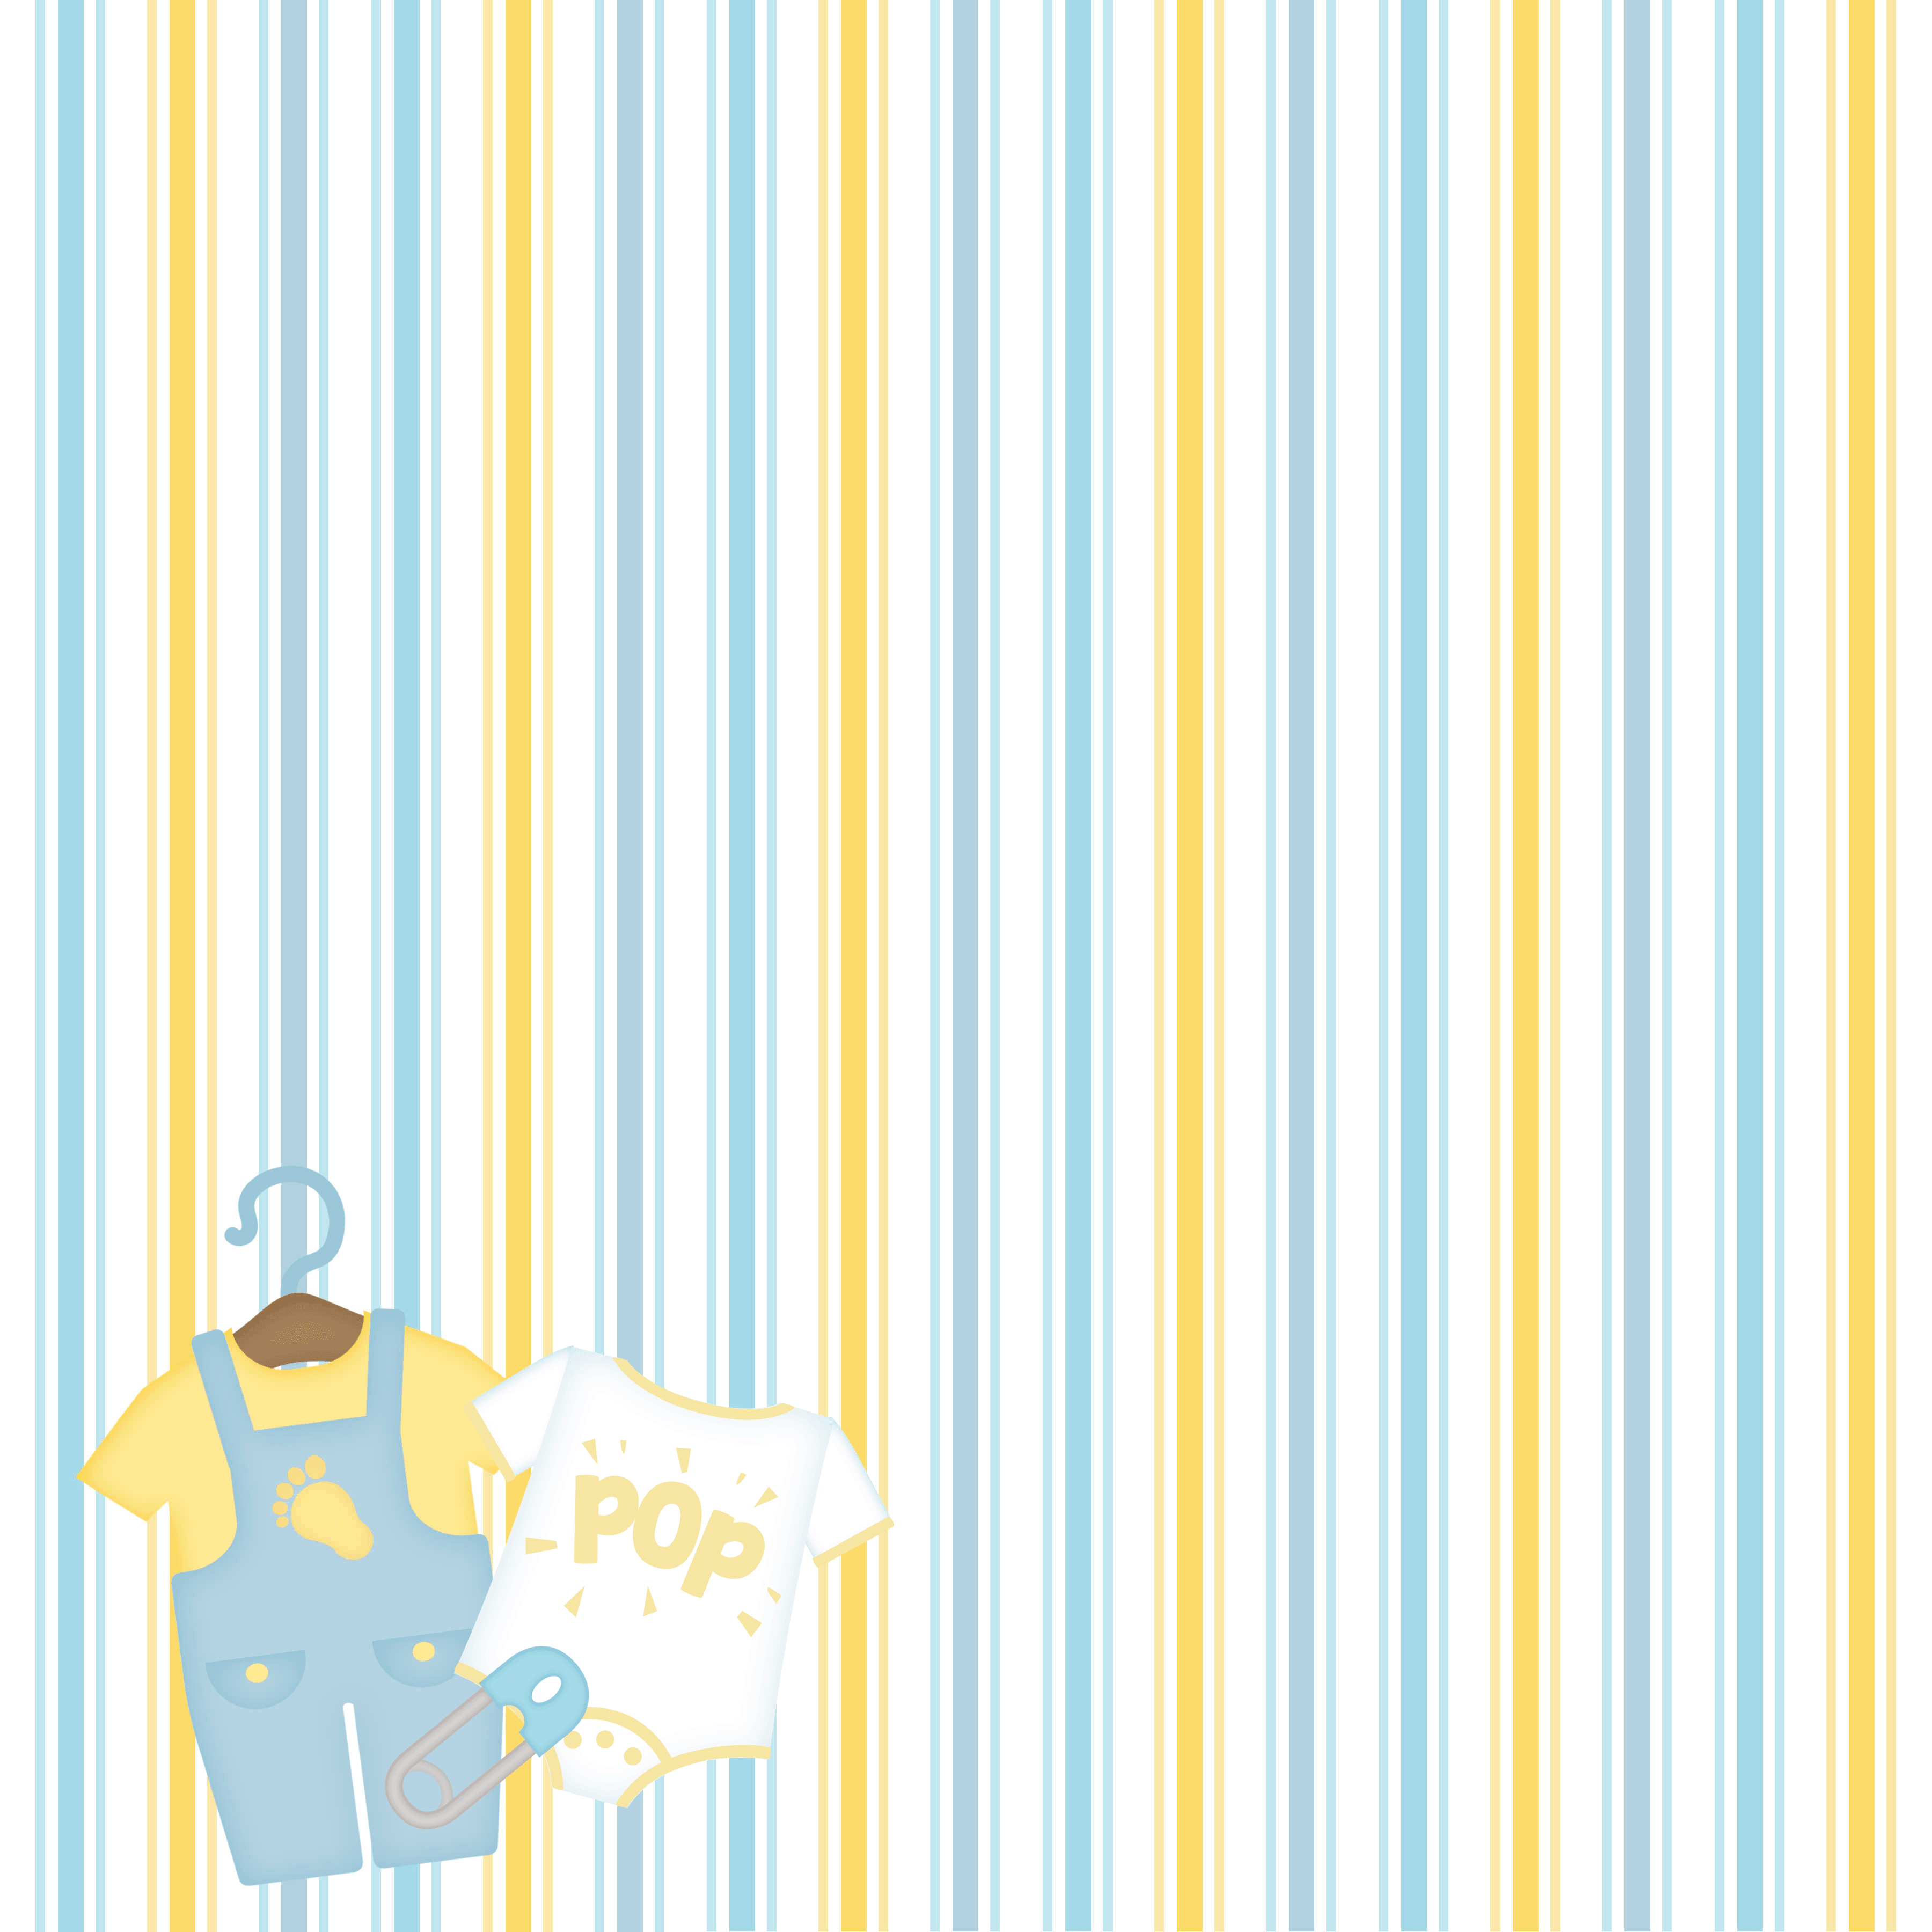 Ready To Pop Collection Onesie Boy 12 x 12 Double-Sided Scrapbook Paper by SSC Designs - Scrapbook Supply Companies